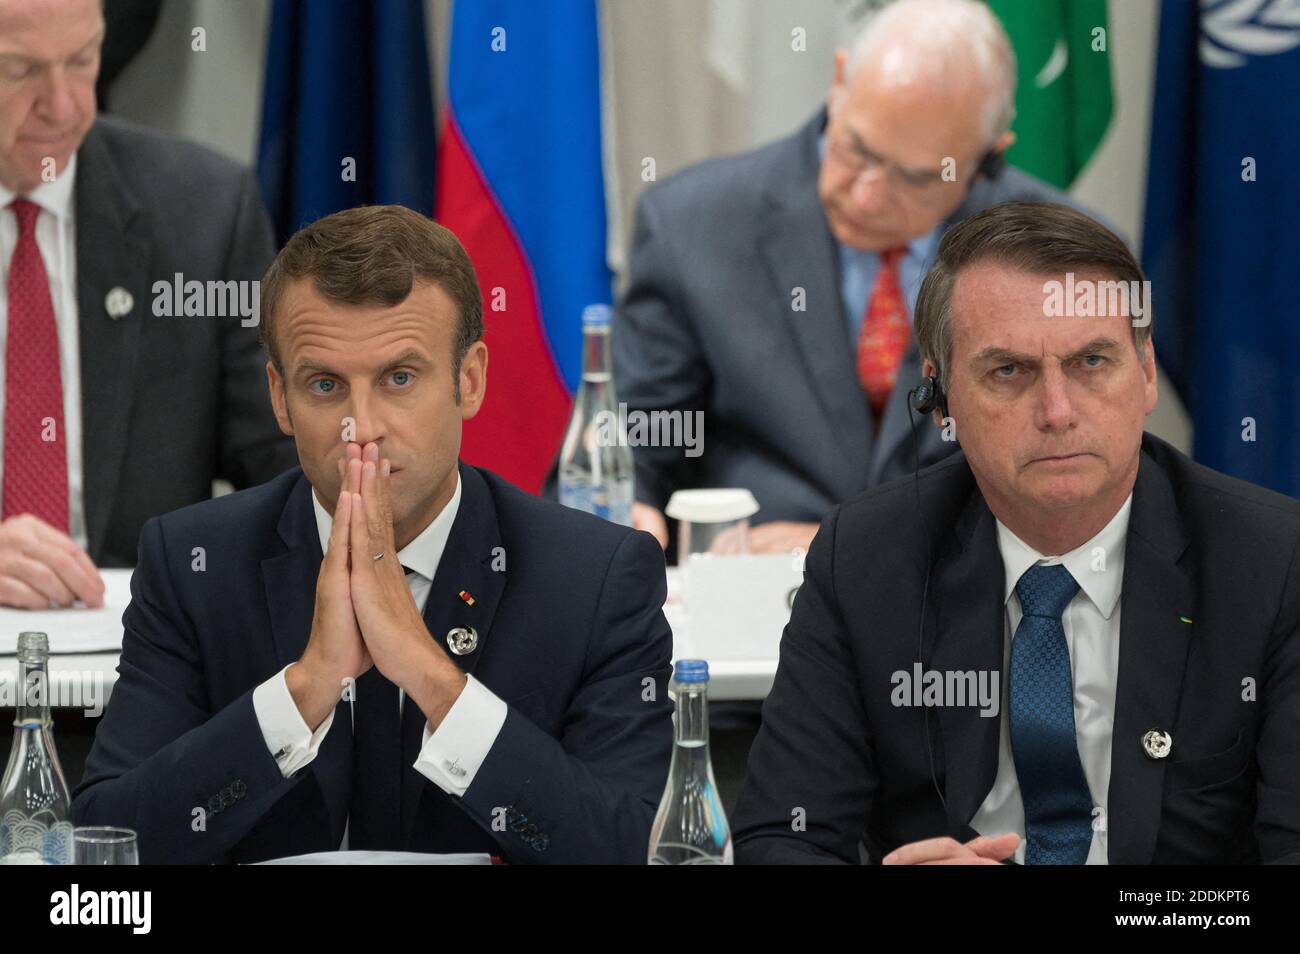 File photo dated June 28, 2019 of Emmanuel Macron and Jair Bolsonaro during a meeting on world economy at the first day of the G20 Summit in Osaka, Japan. On his official Facebook account, the Brazilian president endorsed, Saturday, August 24, an offensive comment against the wife of Emmanuel Macron. Under one of his posts about the sending of armed forces to fight fires, Bolsonaro reacted to a comment mocking the physique of the French First Lady - appearing on a disadvantageous photo - by comparing it to that of Michelle Bolsonaro (37), radiant on the day of the investiture of her husband. P Stock Photo